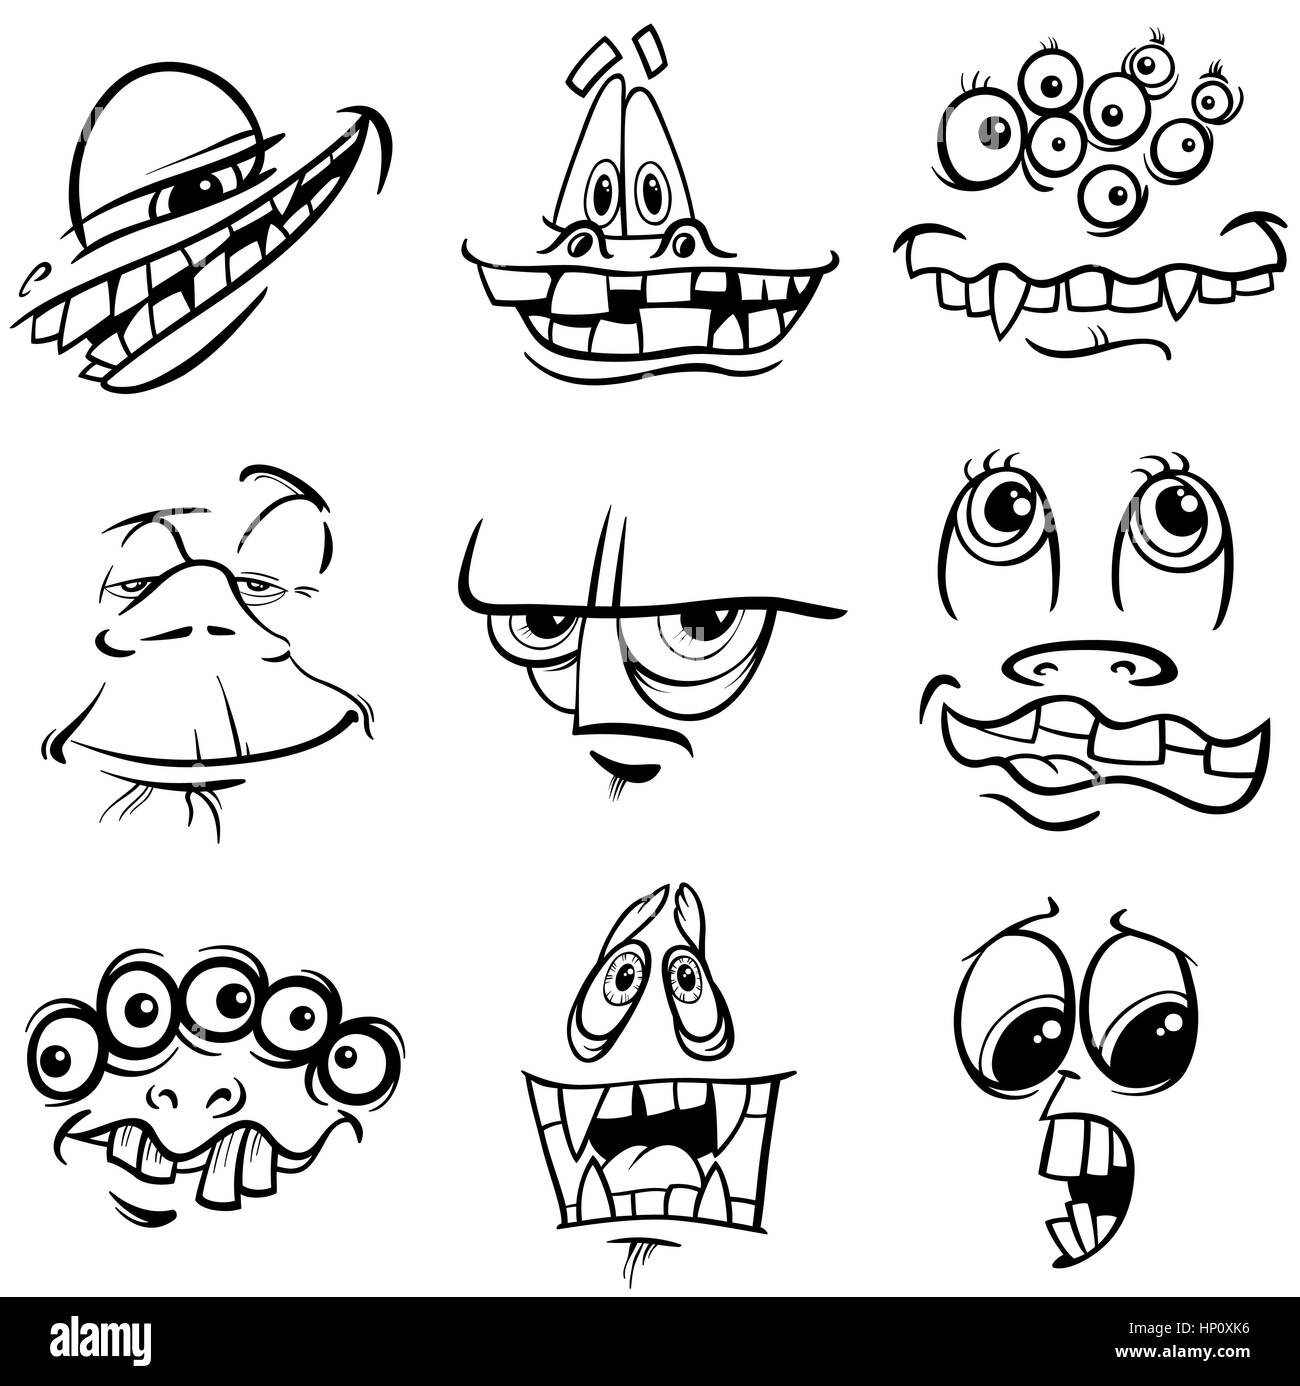 Black and White Cartoon Illustration of Fantasy Monster Characters Faces Set Coloring Page Stock Vector